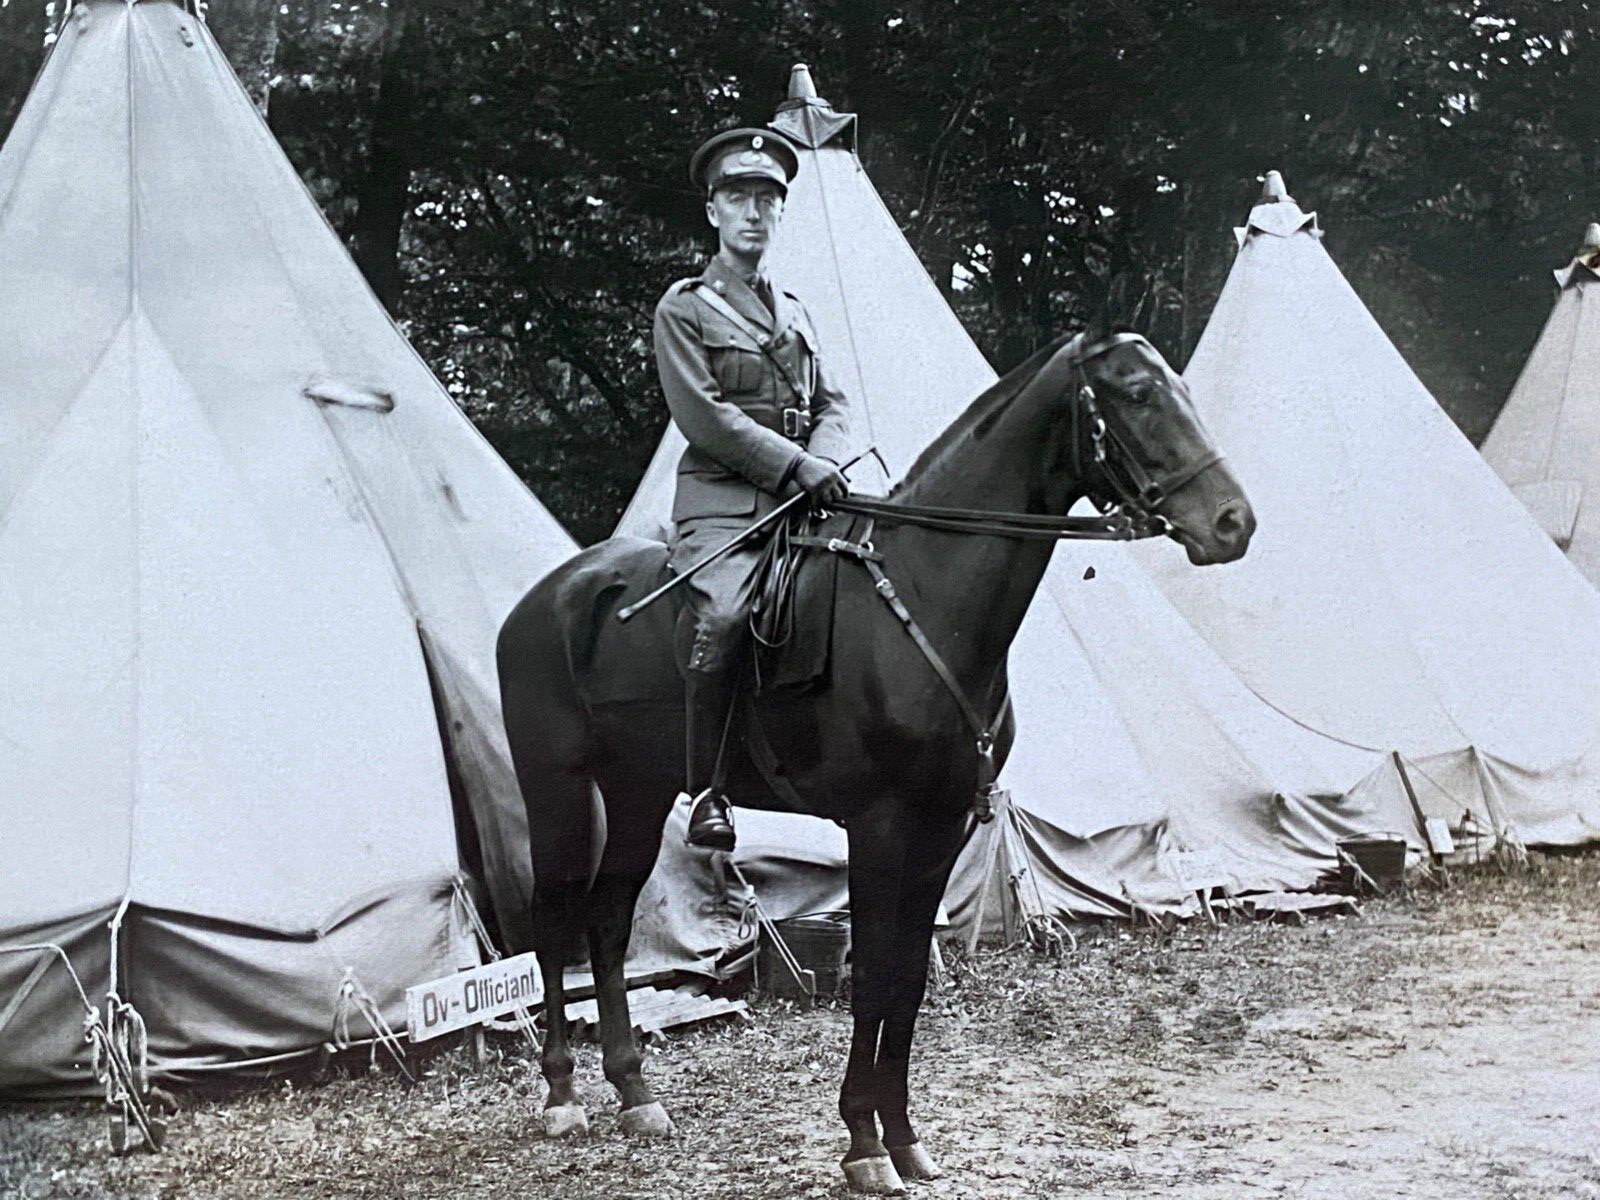 1917 RPPC - WWI ARMY OFFICER ASTRIDE HIS HORSE antique real photograph postcard